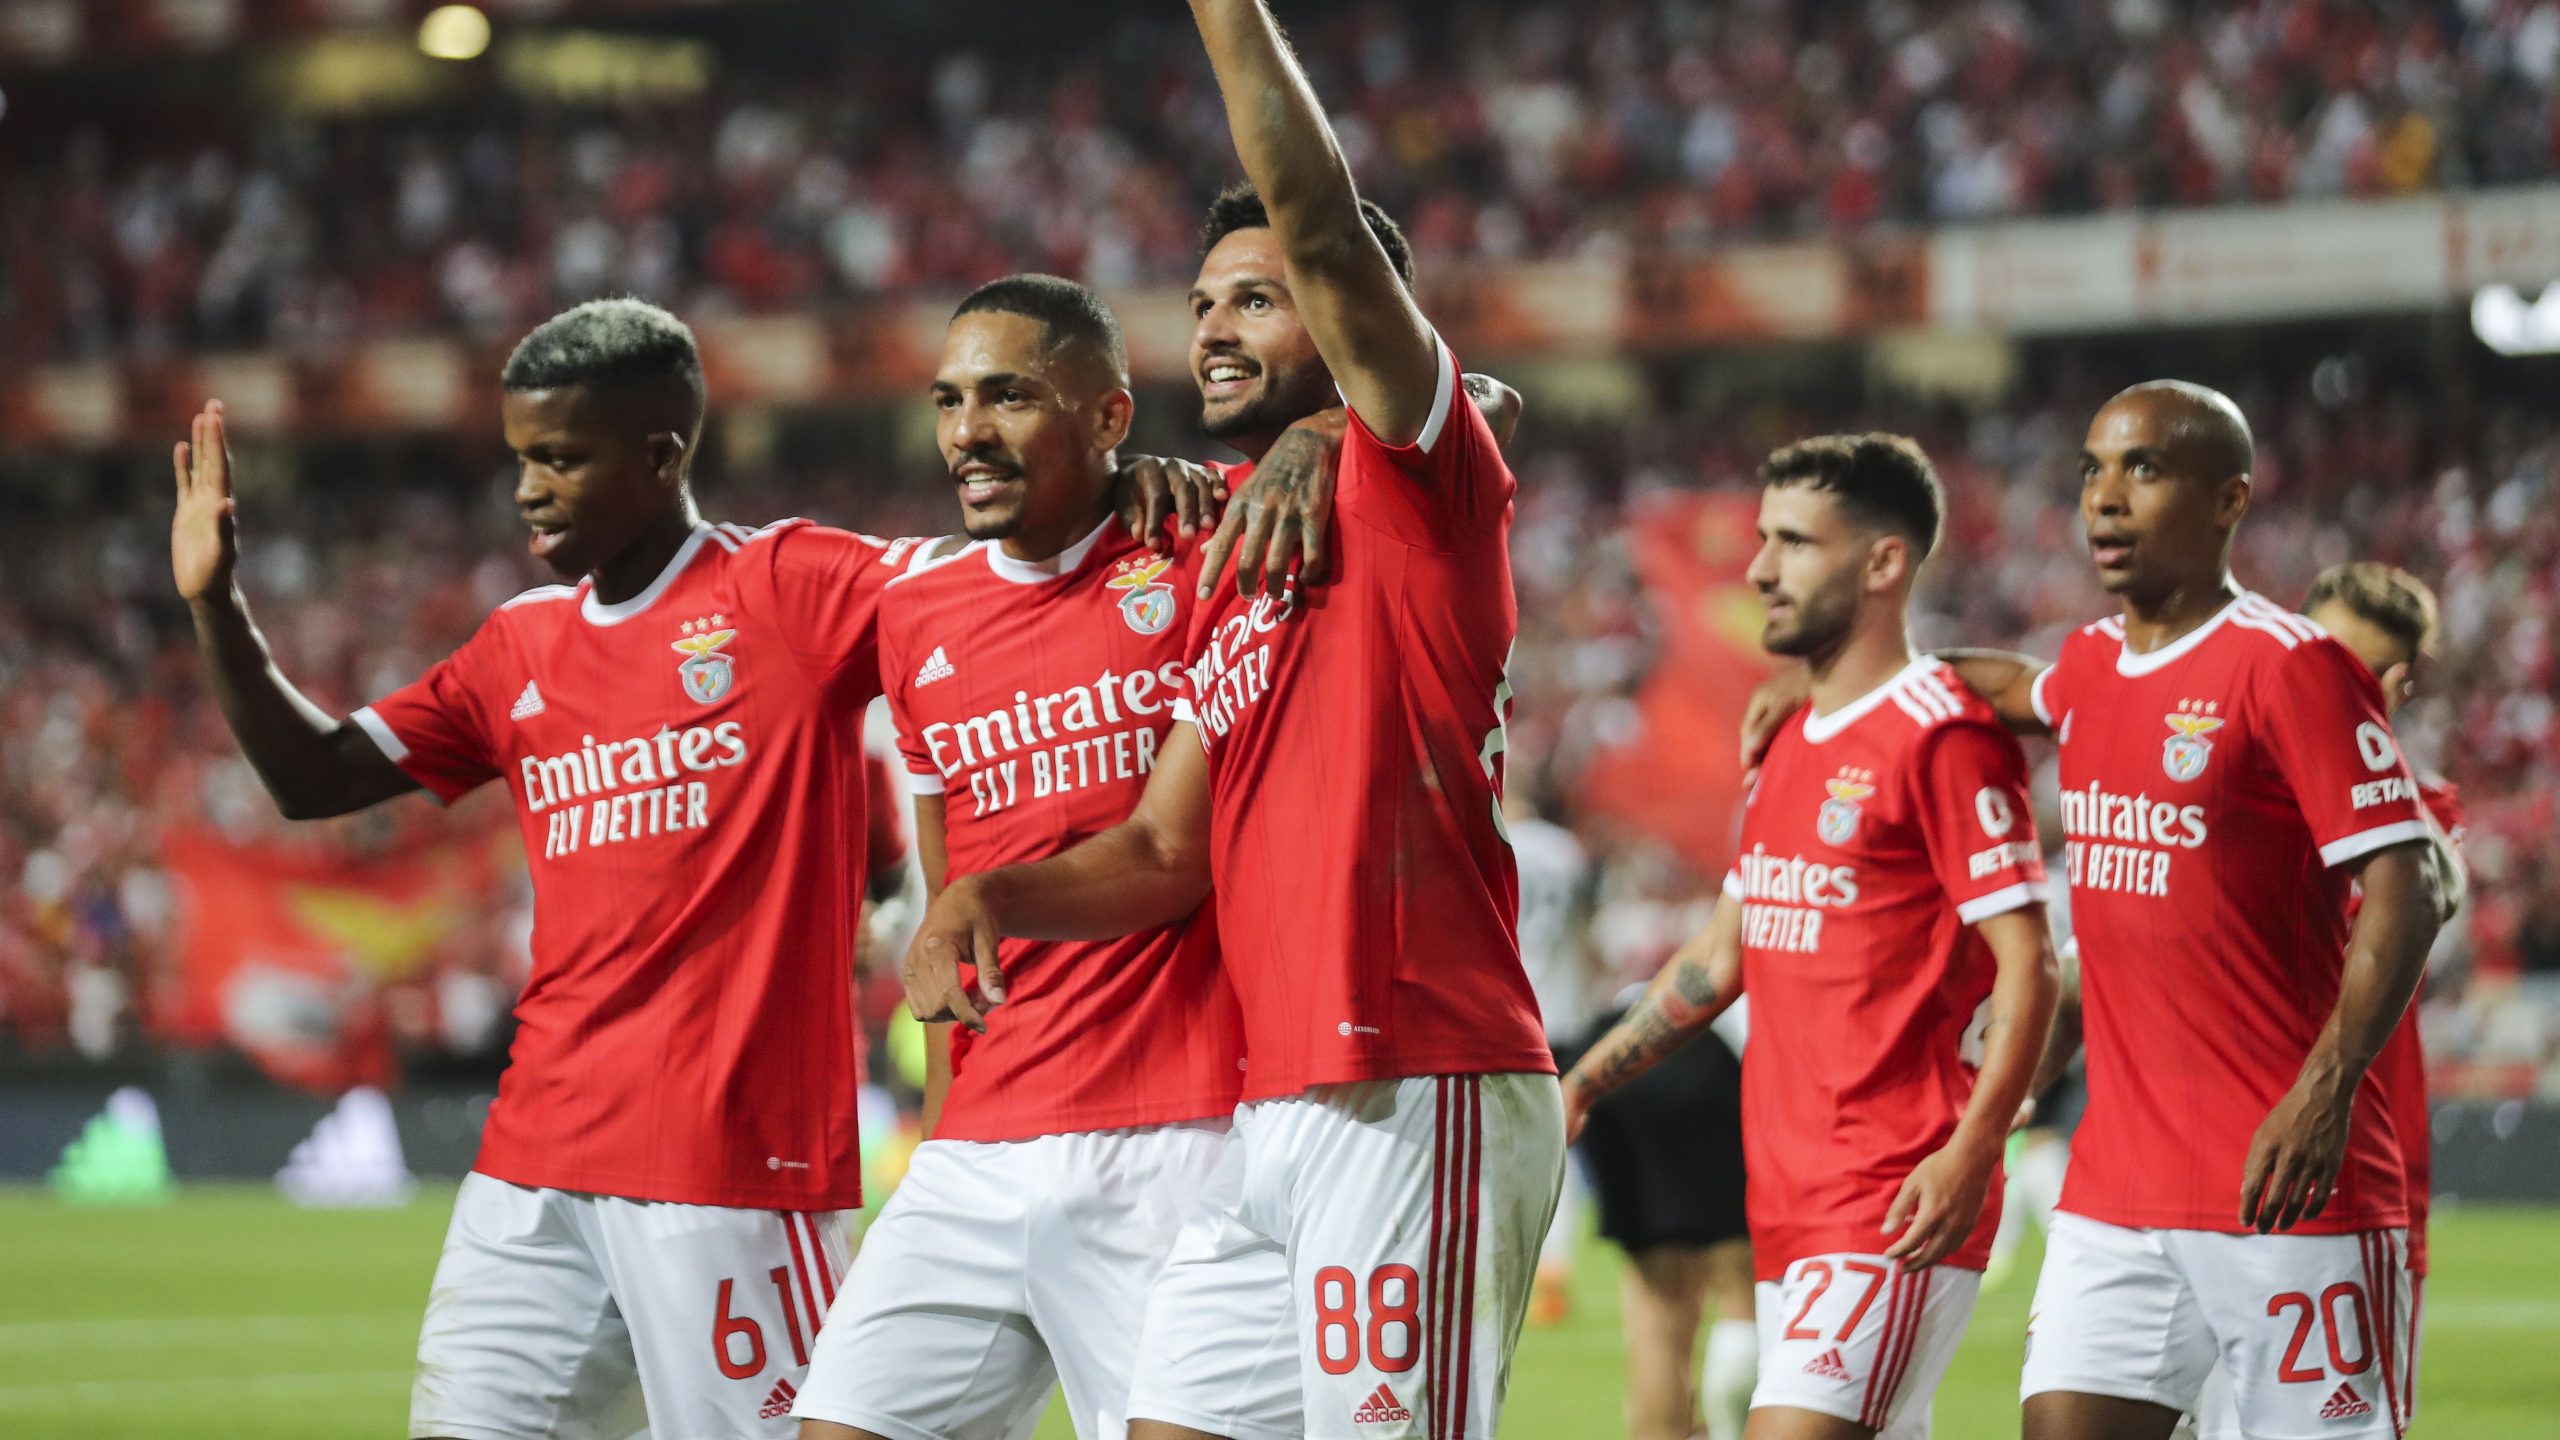 epa10103175 Benfica player Goncalo Ramos (C) celebrates with his team mates after scoring his third goal during the UEFA Champions League qualifying match between SL Benfica and FC Midtjylland held at Luz stadium in Lisbon, Portugal, 02 August 2022.  EPA/MIGUEL A. LOPES